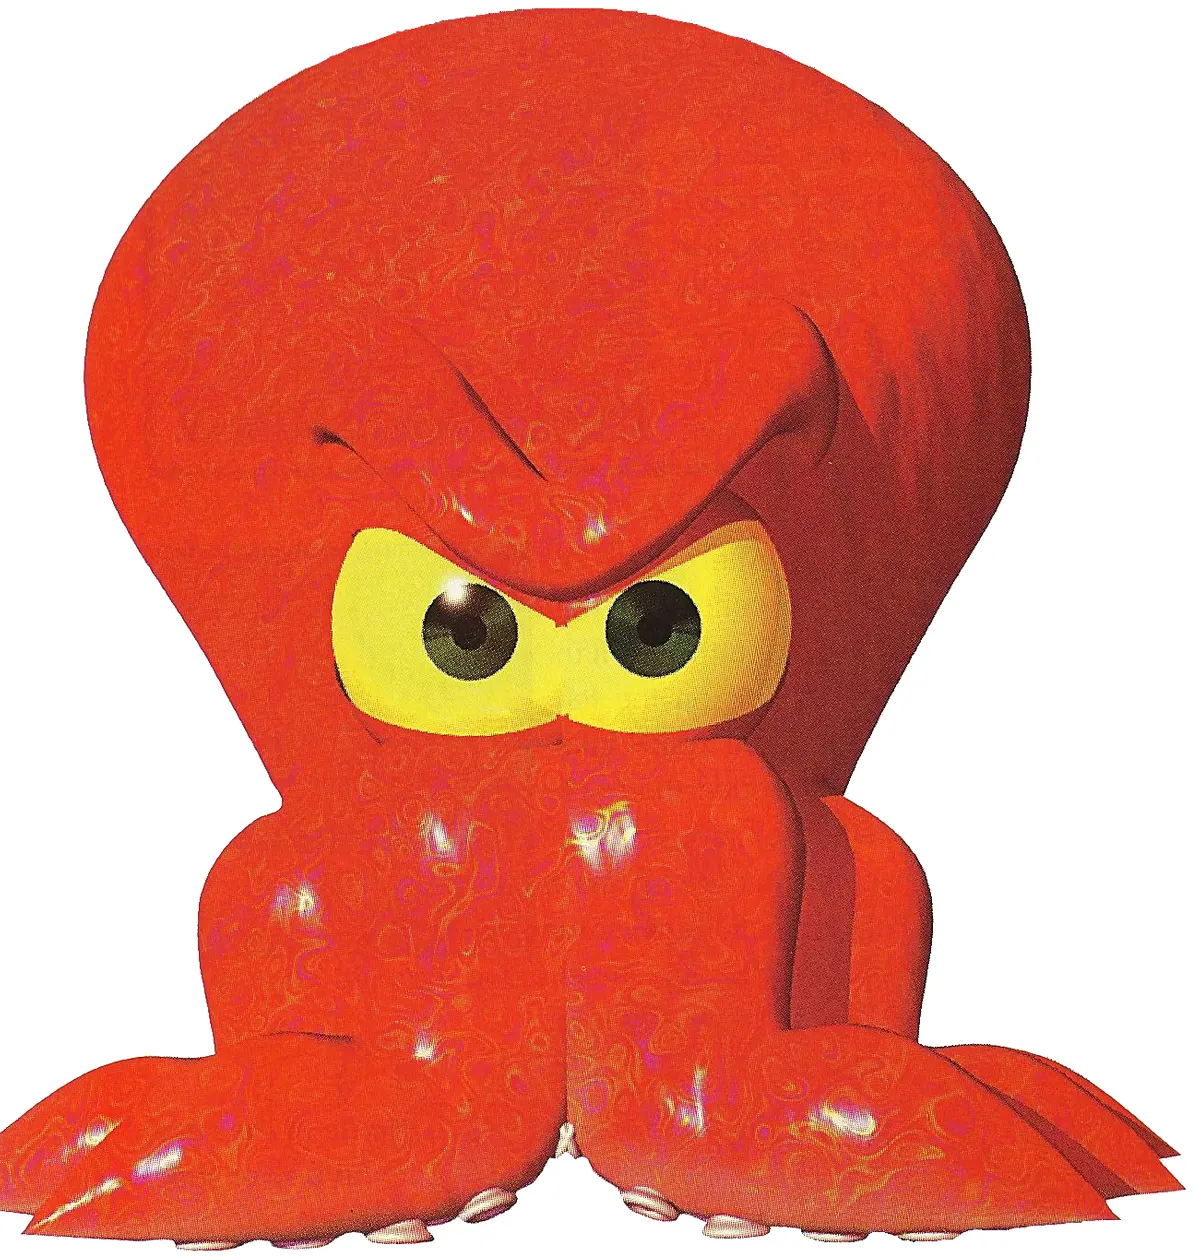 Diddy Kong Racing - Bubbler the Octopus.